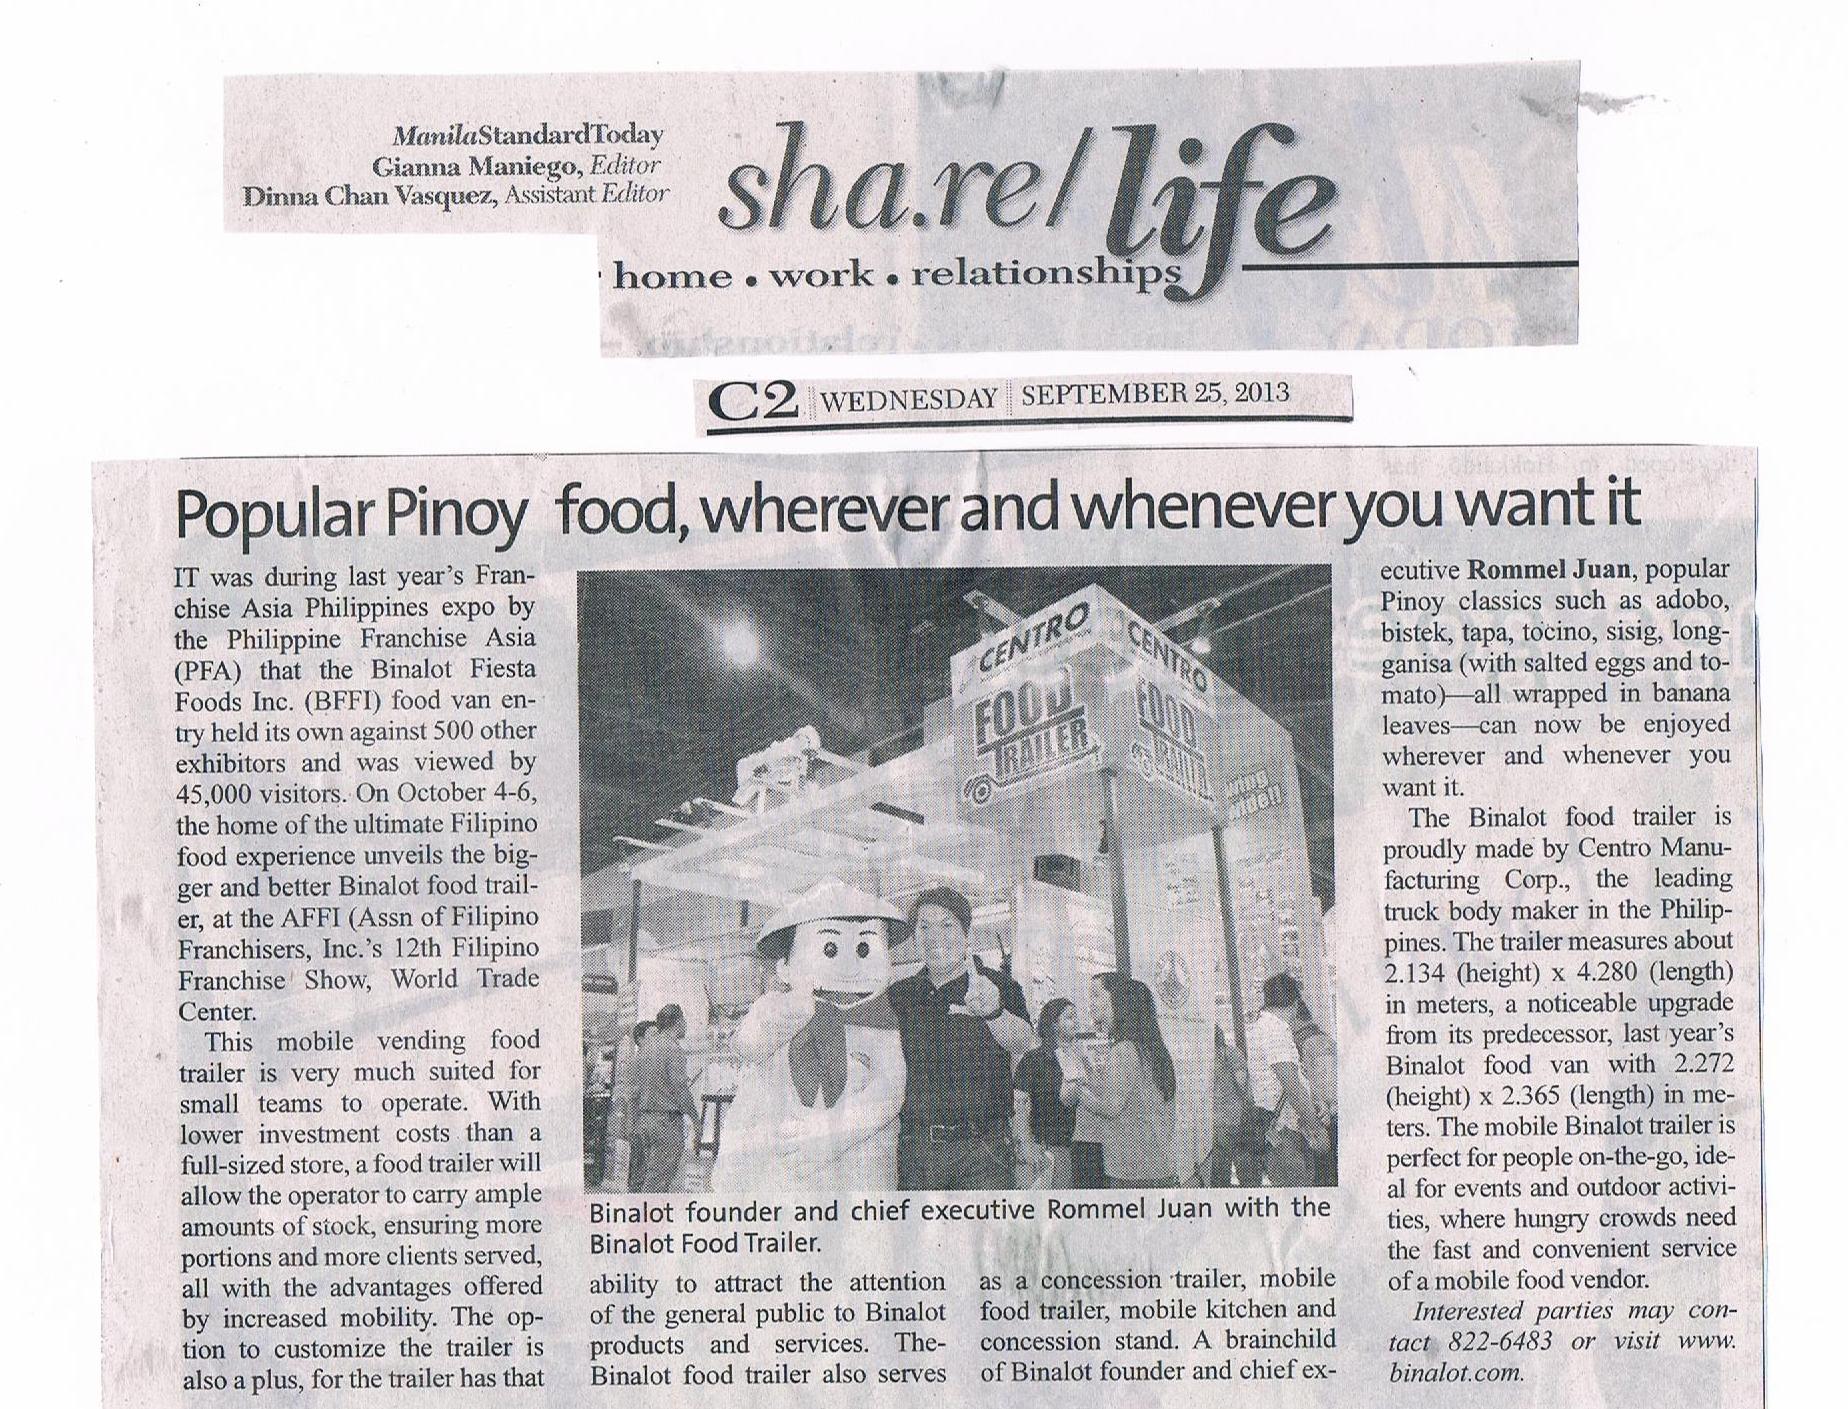 Popular Pinoy food, whenever and whenever you want it, September 25, 2013, Manila Standard Today